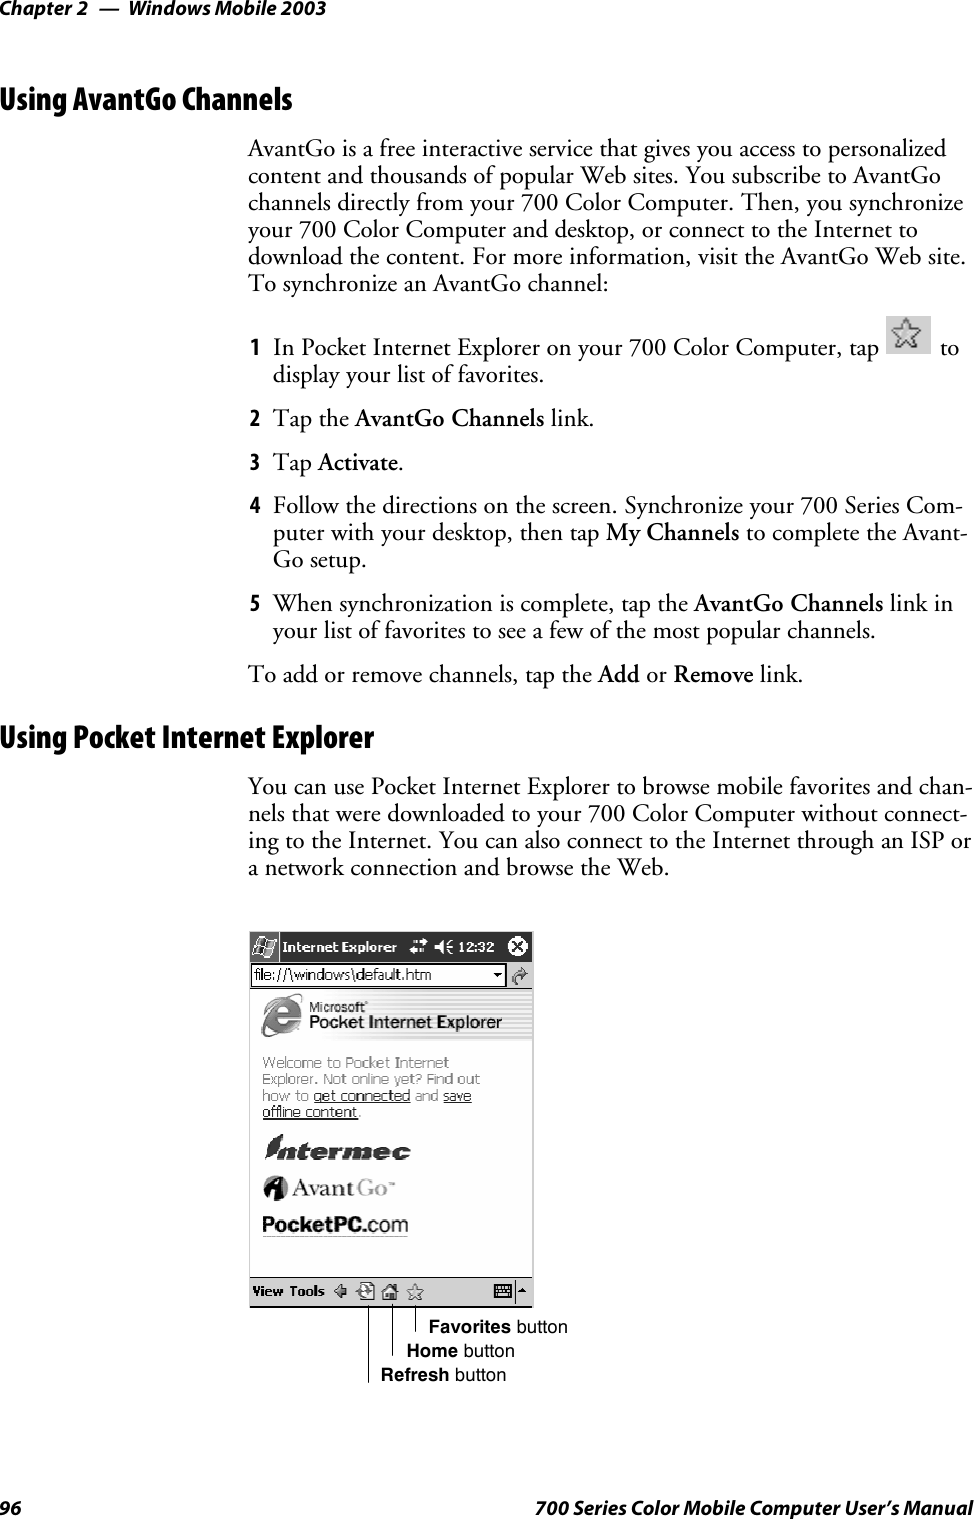 Windows Mobile 2003Chapter —296 700 Series Color Mobile Computer User’s ManualUsing AvantGo ChannelsAvantGo is a free interactive service that gives you access to personalizedcontent and thousands of popular Web sites. You subscribe to AvantGochannels directly from your 700 Color Computer. Then, you synchronizeyour 700 Color Computer and desktop, or connect to the Internet todownload the content. For more information, visit the AvantGo Web site.To synchronize an AvantGo channel:1In Pocket Internet Explorer on your 700 Color Computer, tap todisplay your list of favorites.2Tap the AvantGo Channels link.3Tap Activate.4Follow the directions on the screen. Synchronize your 700 Series Com-puter with your desktop, then tap My Channels to complete the Avant-Go setup.5When synchronization is complete, tap the AvantGo Channels link inyour list of favorites to see a few of the most popular channels.To add or remove channels, tap the Add or Remove link.Using Pocket Internet ExplorerYou can use Pocket Internet Explorer to browse mobile favorites and chan-nels that were downloaded to your 700 Color Computer without connect-ing to the Internet. You can also connect to the Internet through an ISP ora network connection and browse the Web.Favorites buttonHome buttonRefresh button